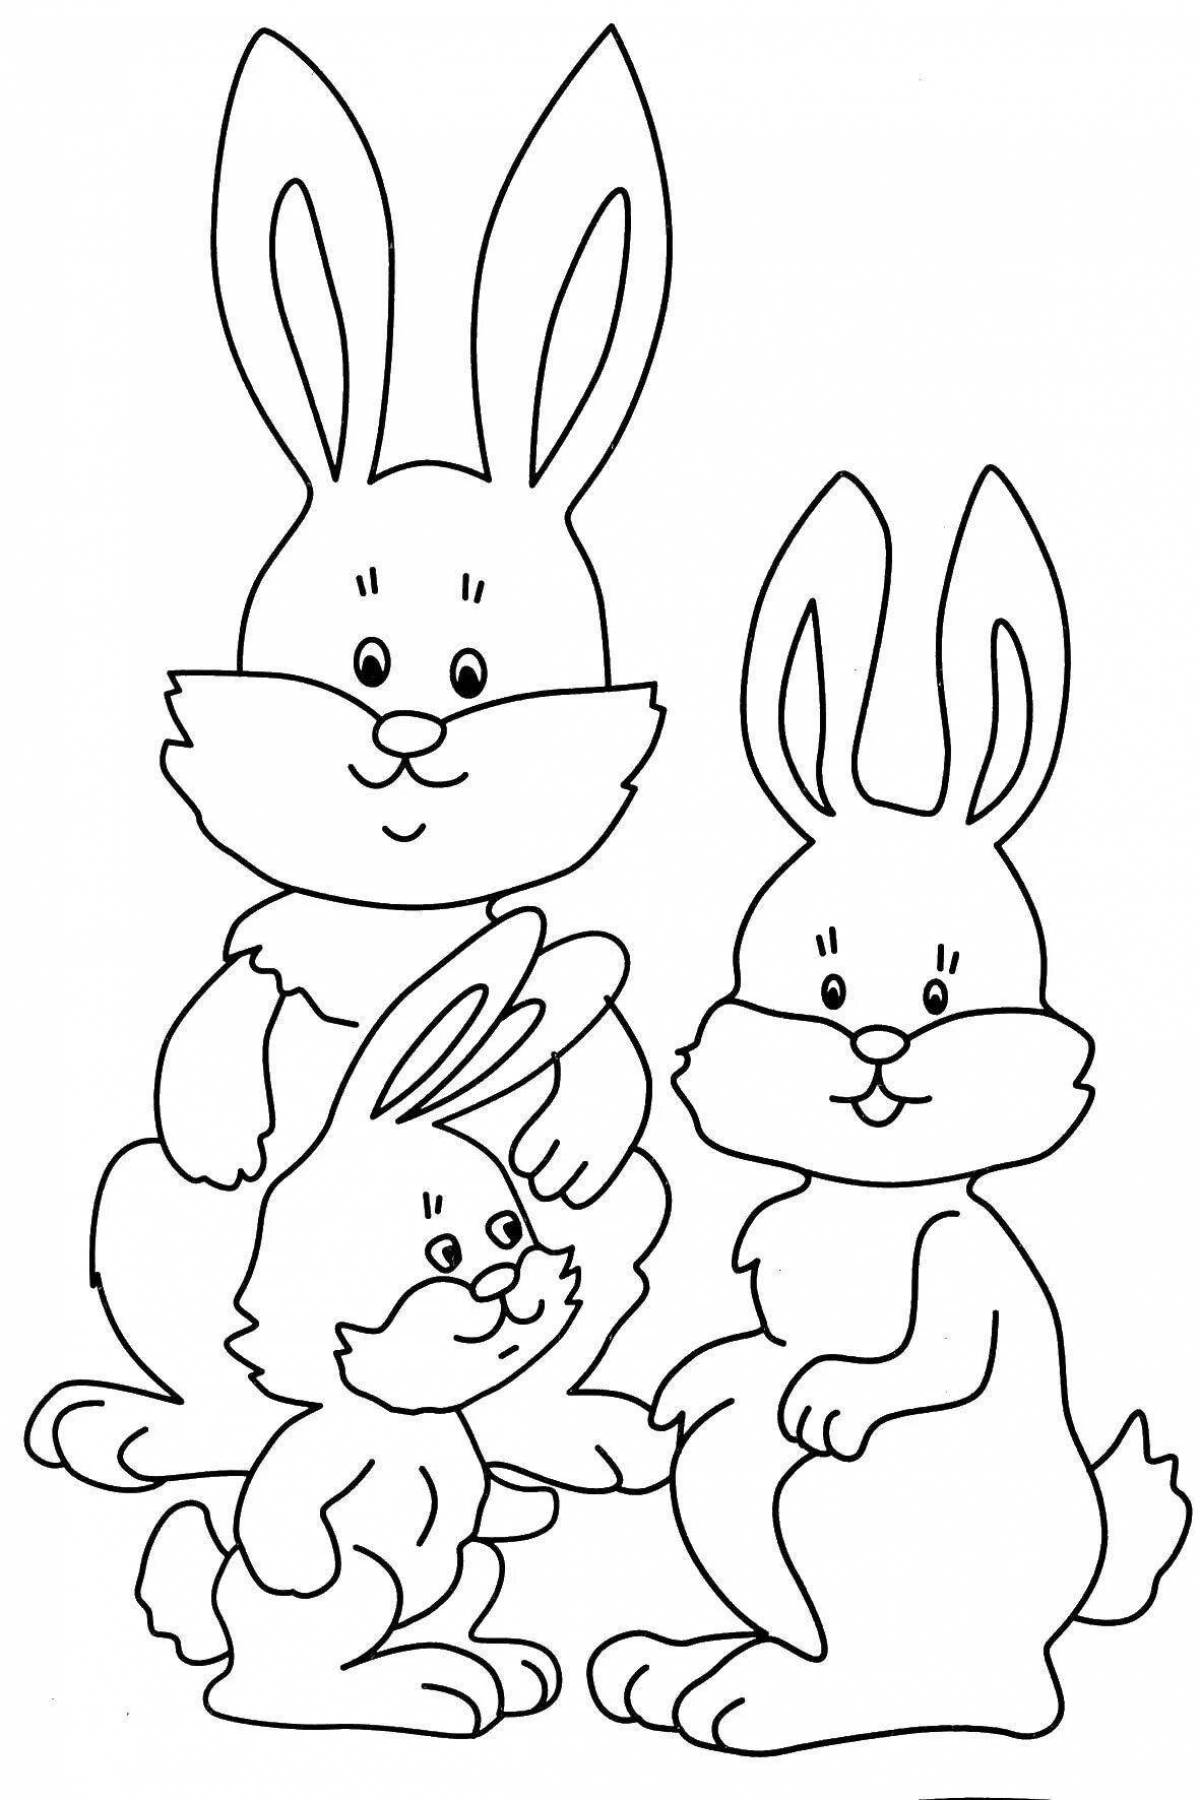 Adorable bunny coloring picture for kids